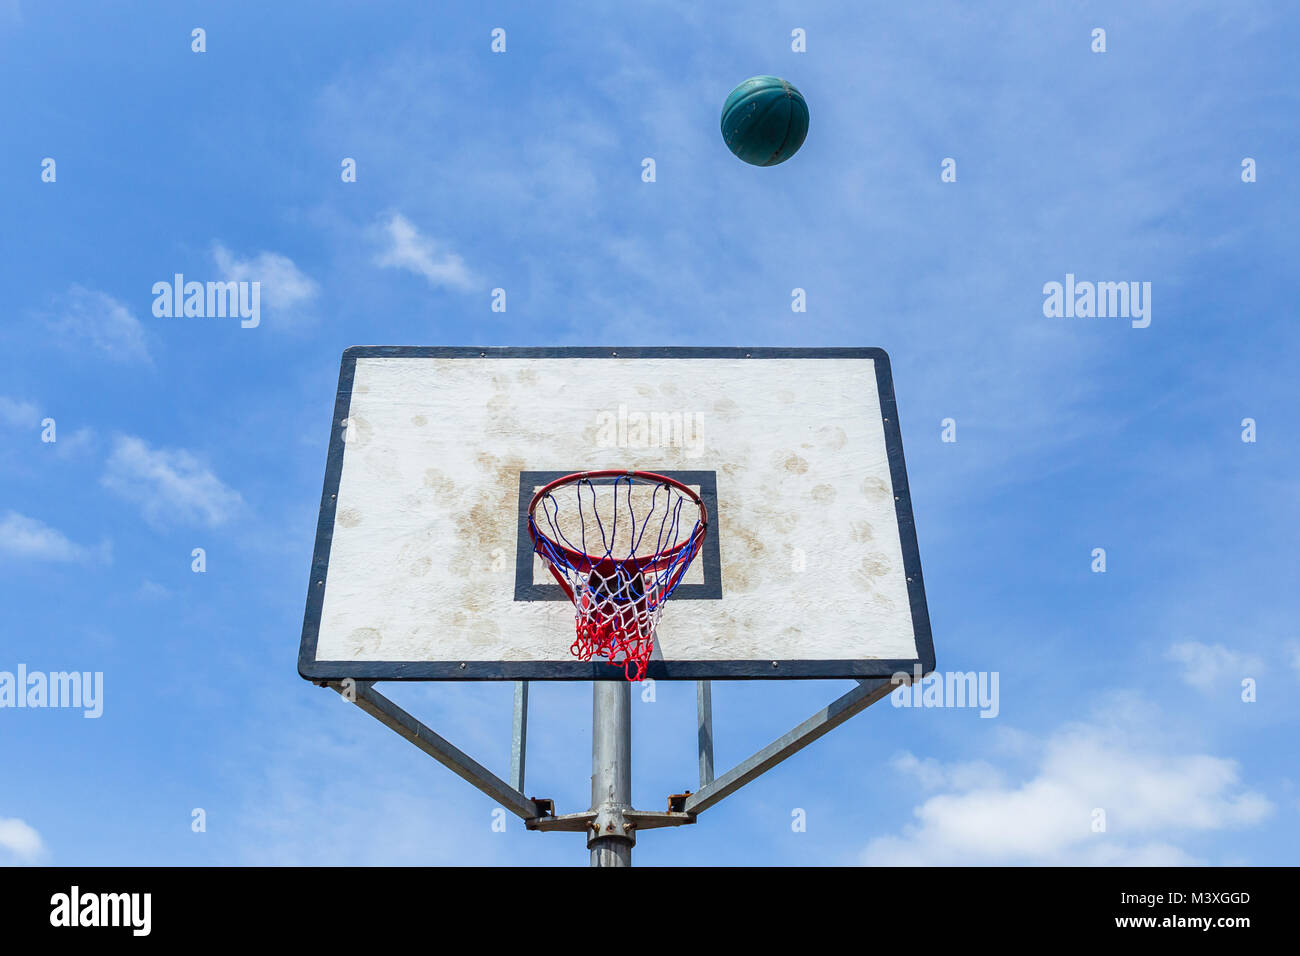 Basketball blue ball flight towards board and net against sky outdoor court Stock Photo